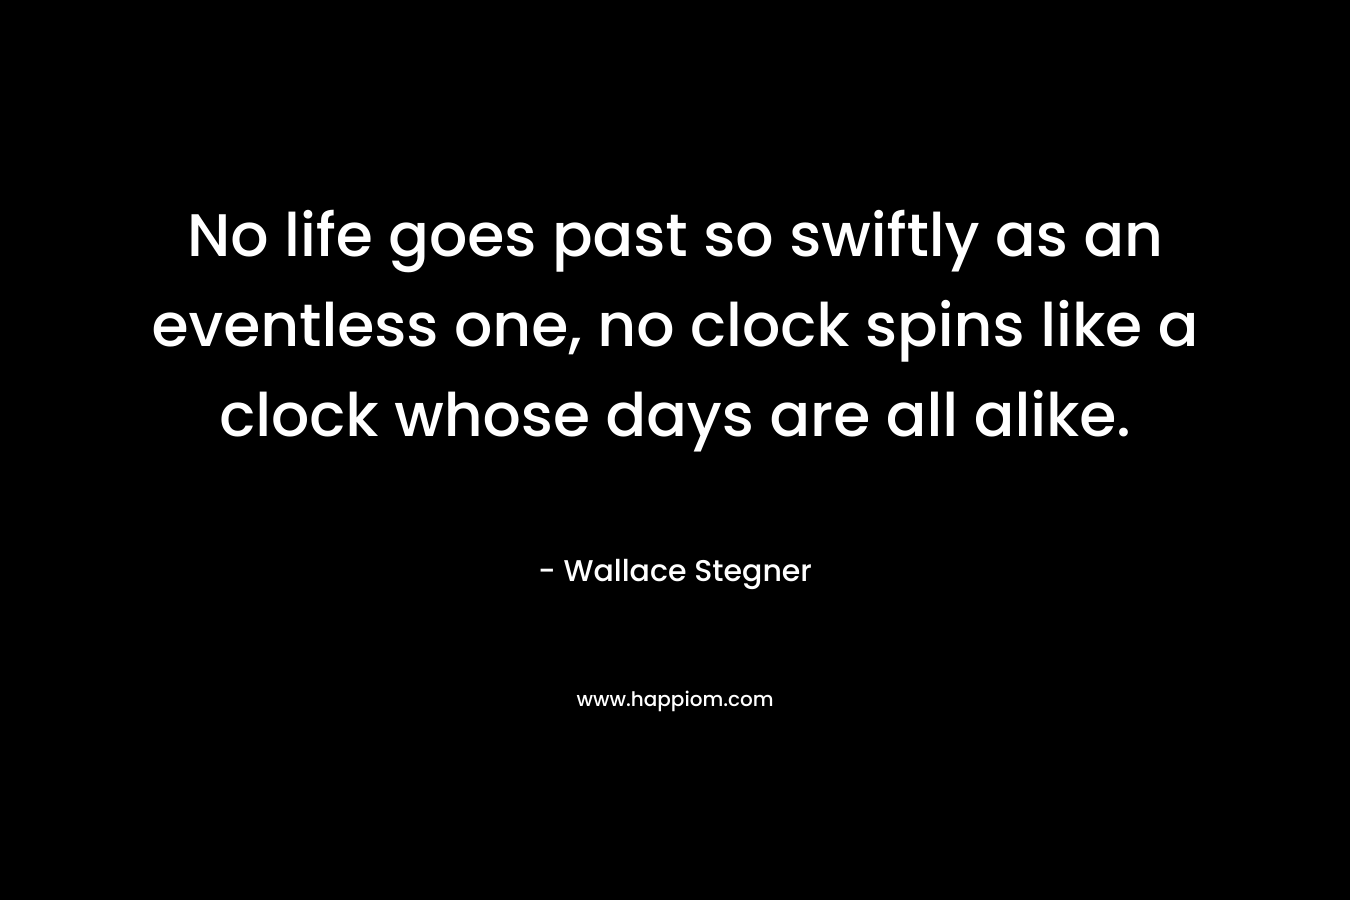 No life goes past so swiftly as an eventless one, no clock spins like a clock whose days are all alike. – Wallace Stegner